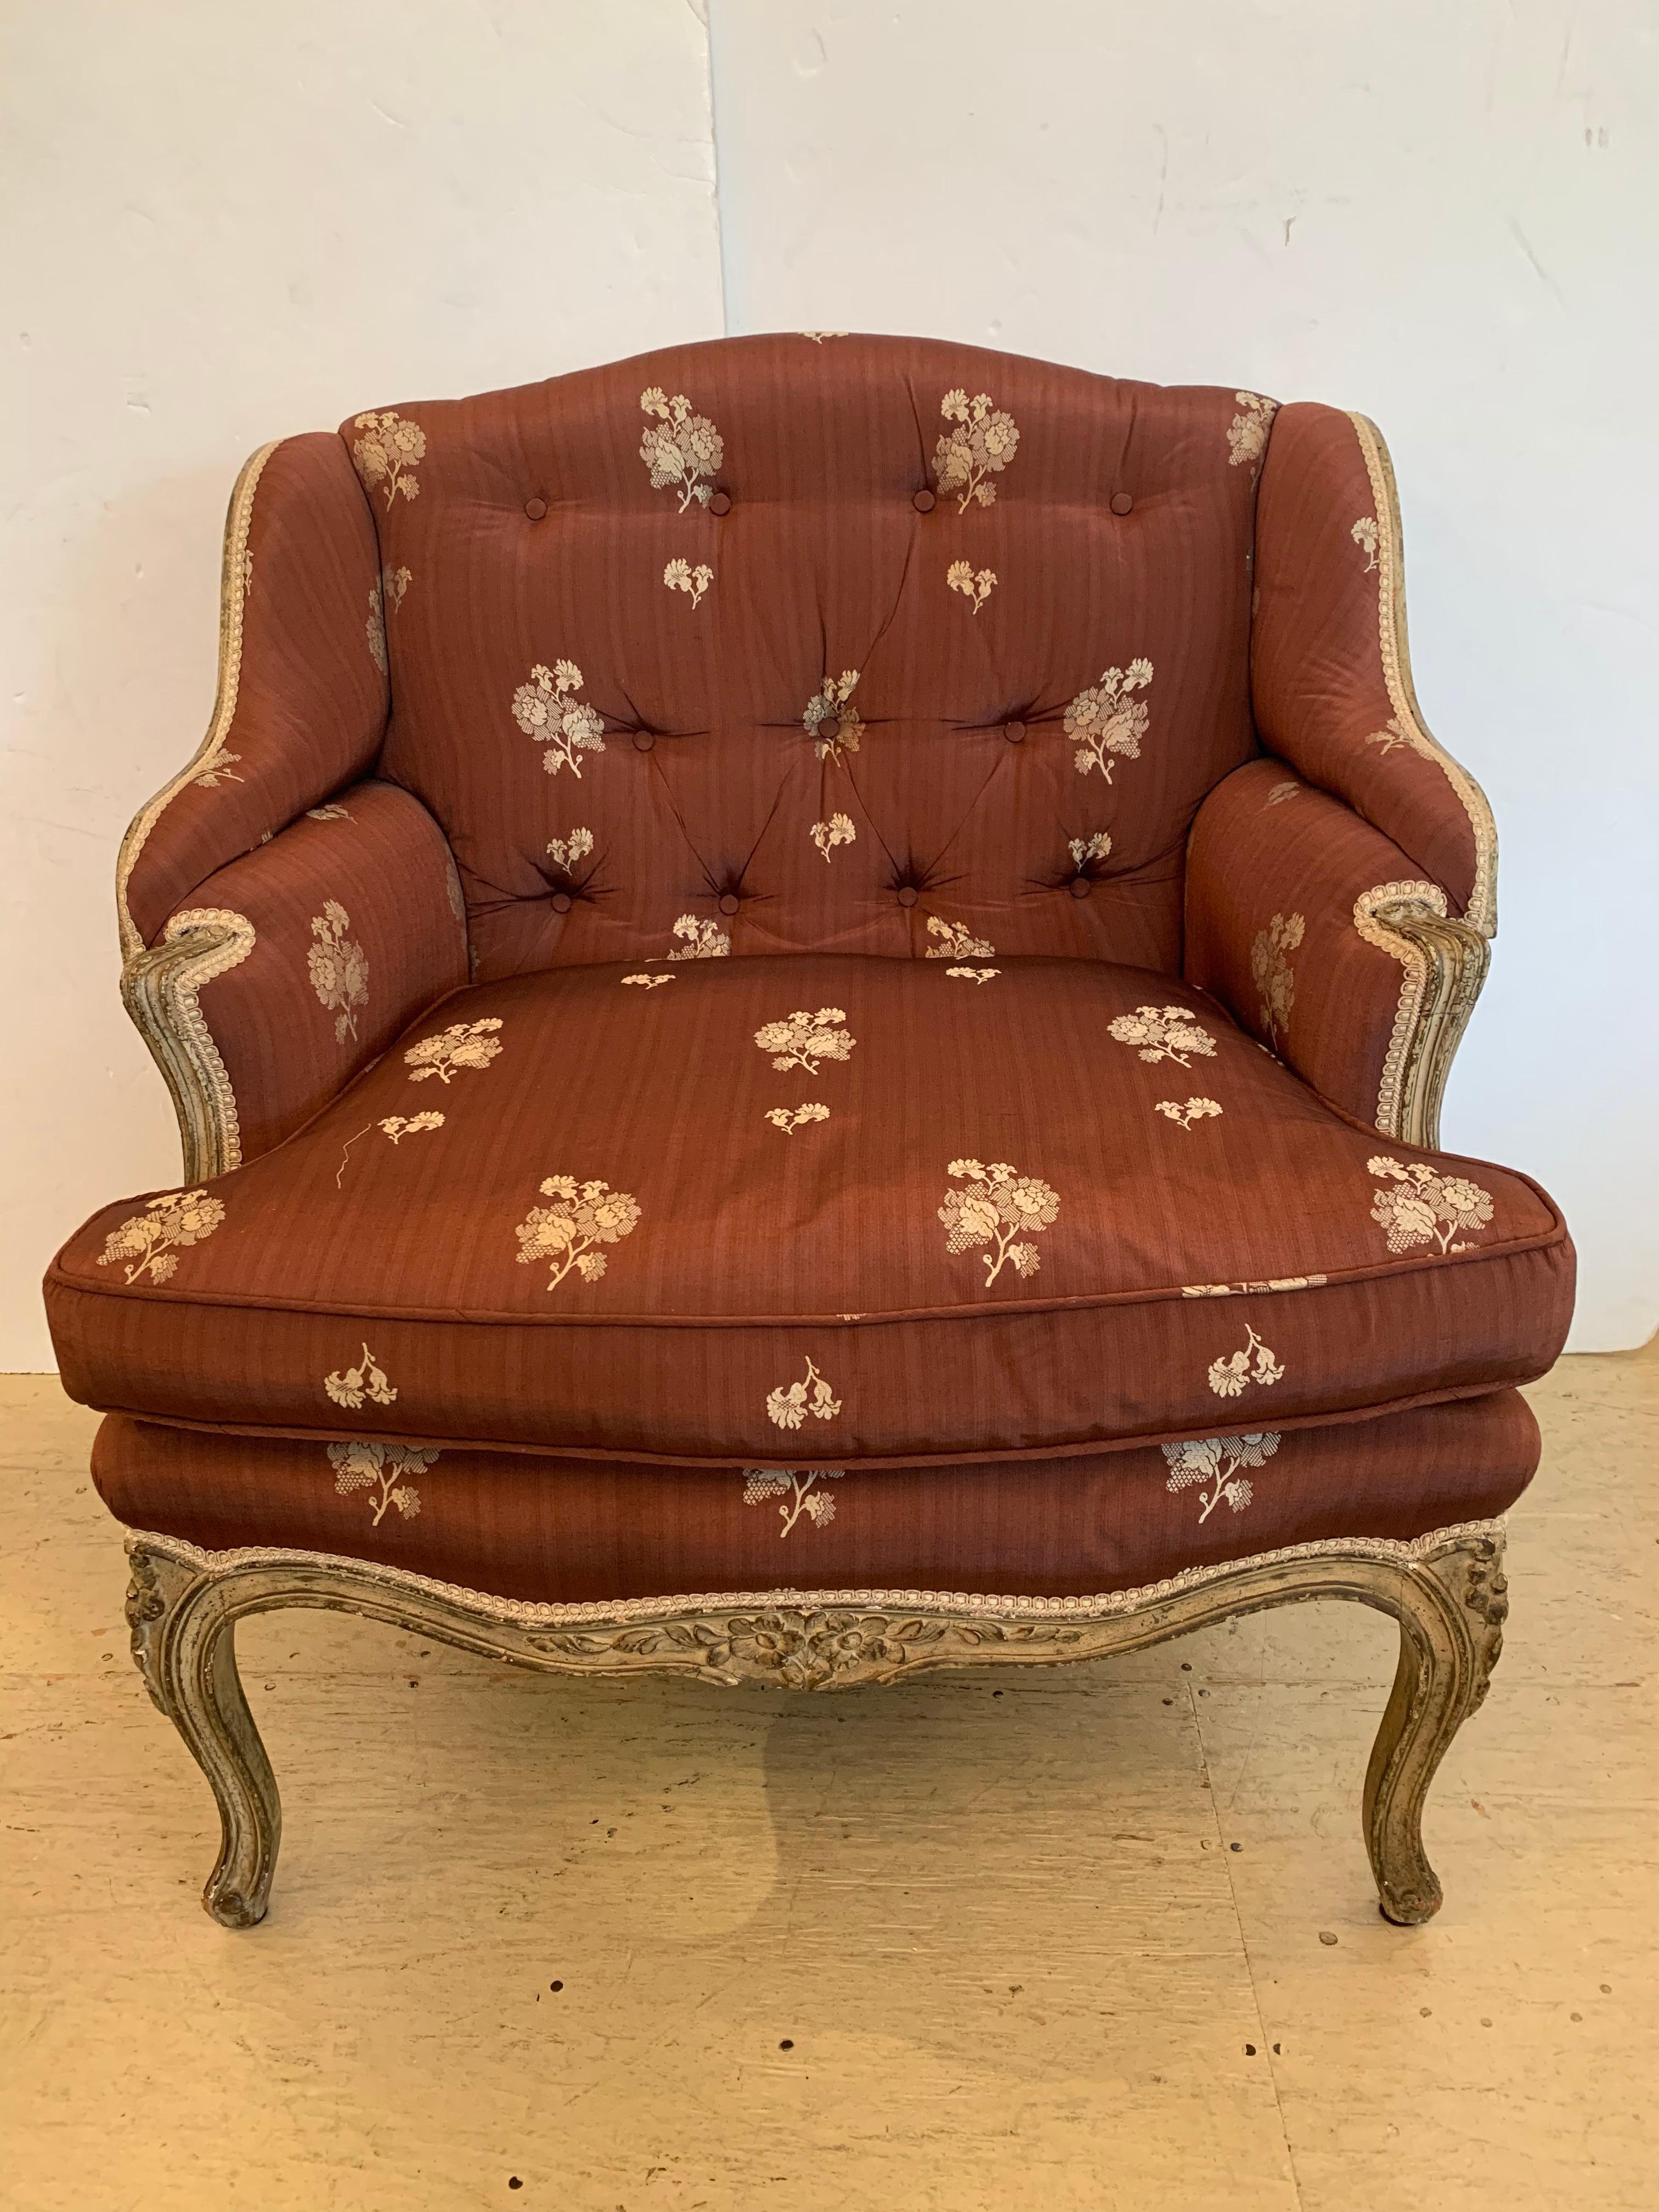 A romantic French Louis XV armchair, generous in width but still feminine in stature having a worn creamy painted finish upholstered in a Rose Tarlow silk with trim detail. Cabriole legs and open back are additional points of beauty. The chair is